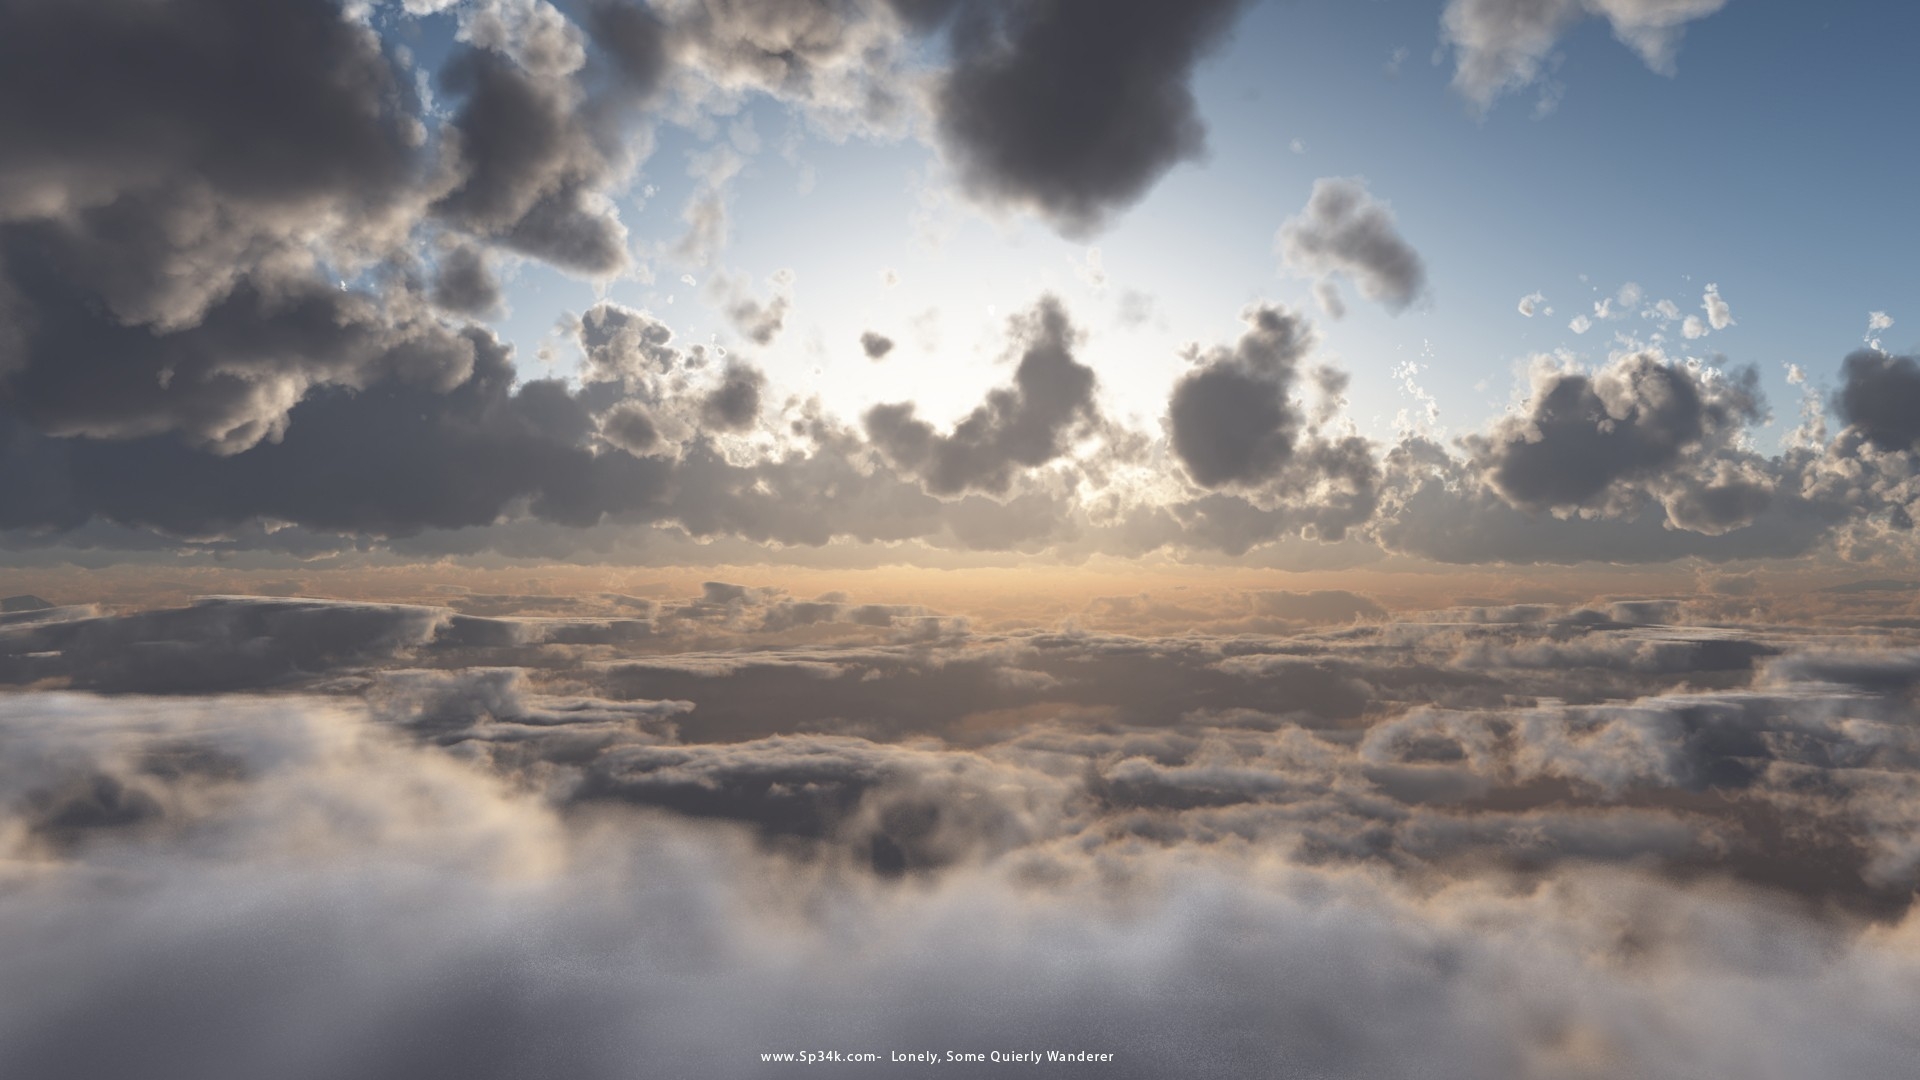 clouds landscapes lonely realistic render 3D vue rendering eon skies 1920x1080 wallpaper High Quality Wallpaper, High Definition Wallpaper